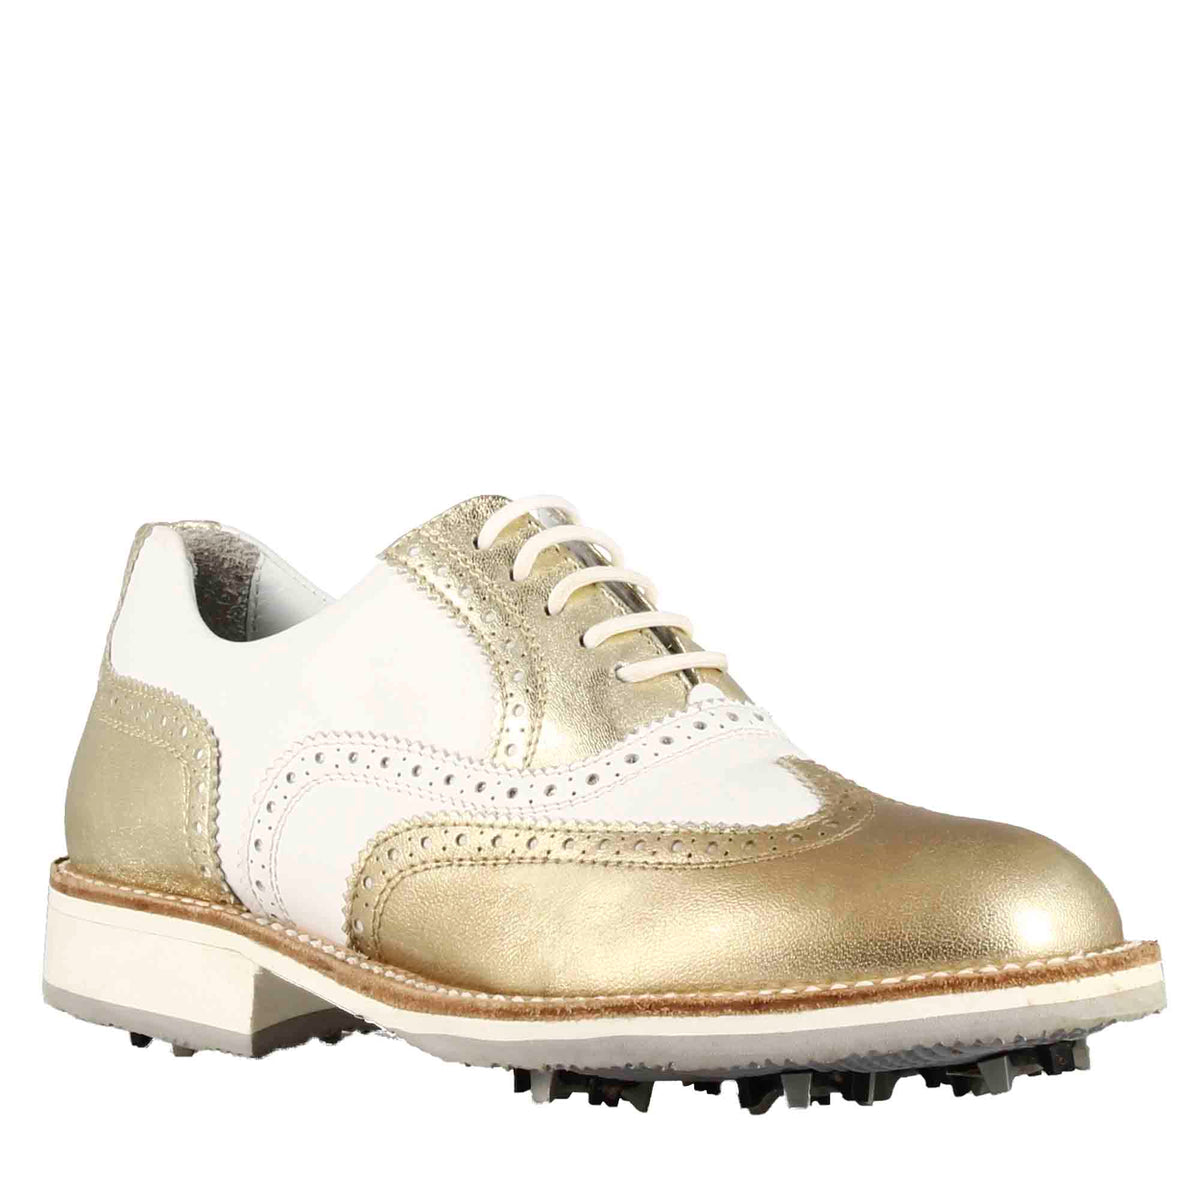 Handcrafted women's golf shoes in white leather with gold-colored details